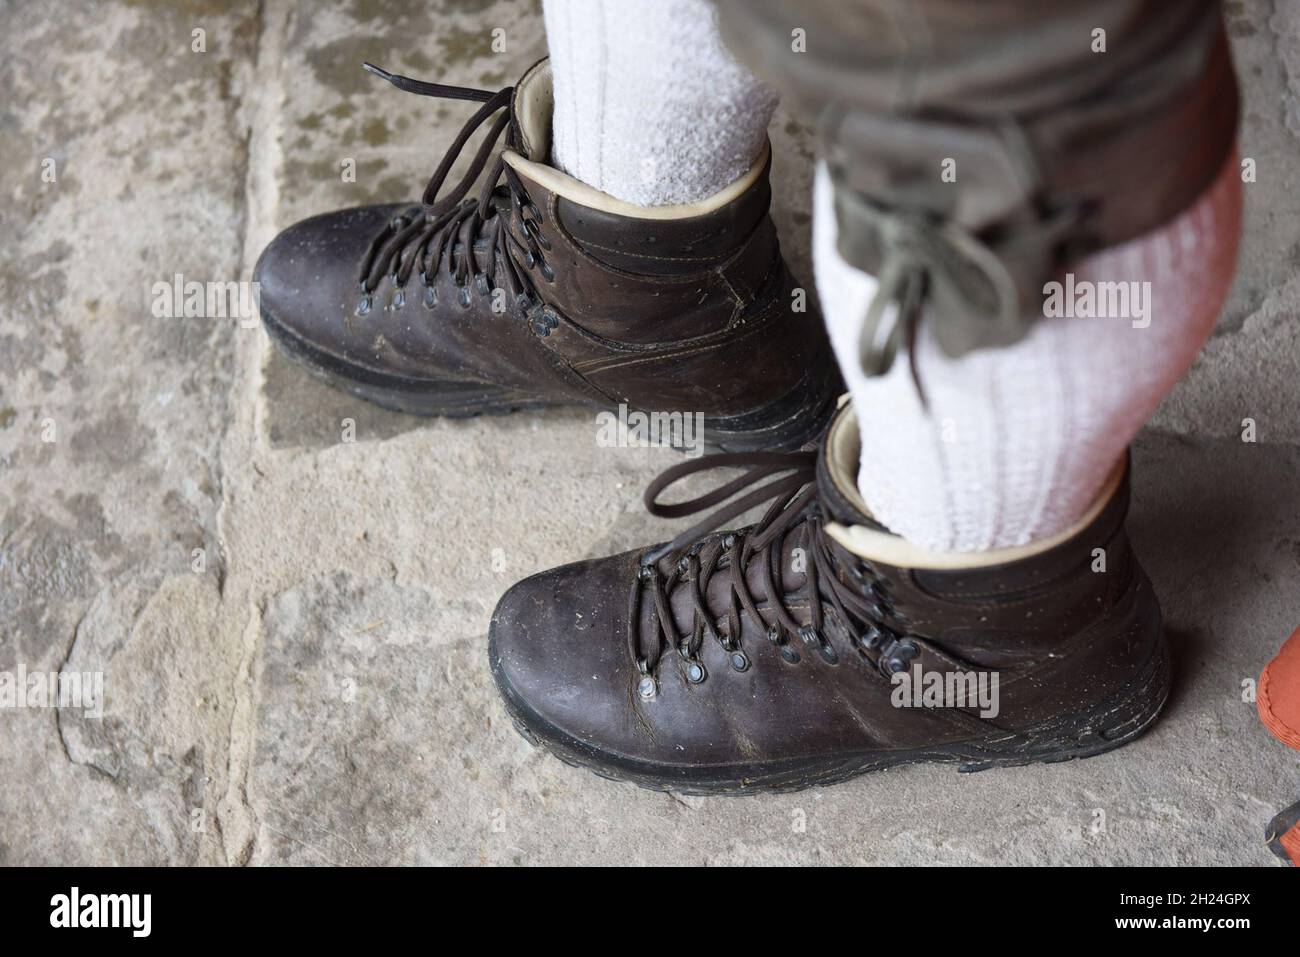 Fest Berg- und Wanderschuhe mit Lederhose - Fixed mountain and hiking boots with leather pants Stock Photo